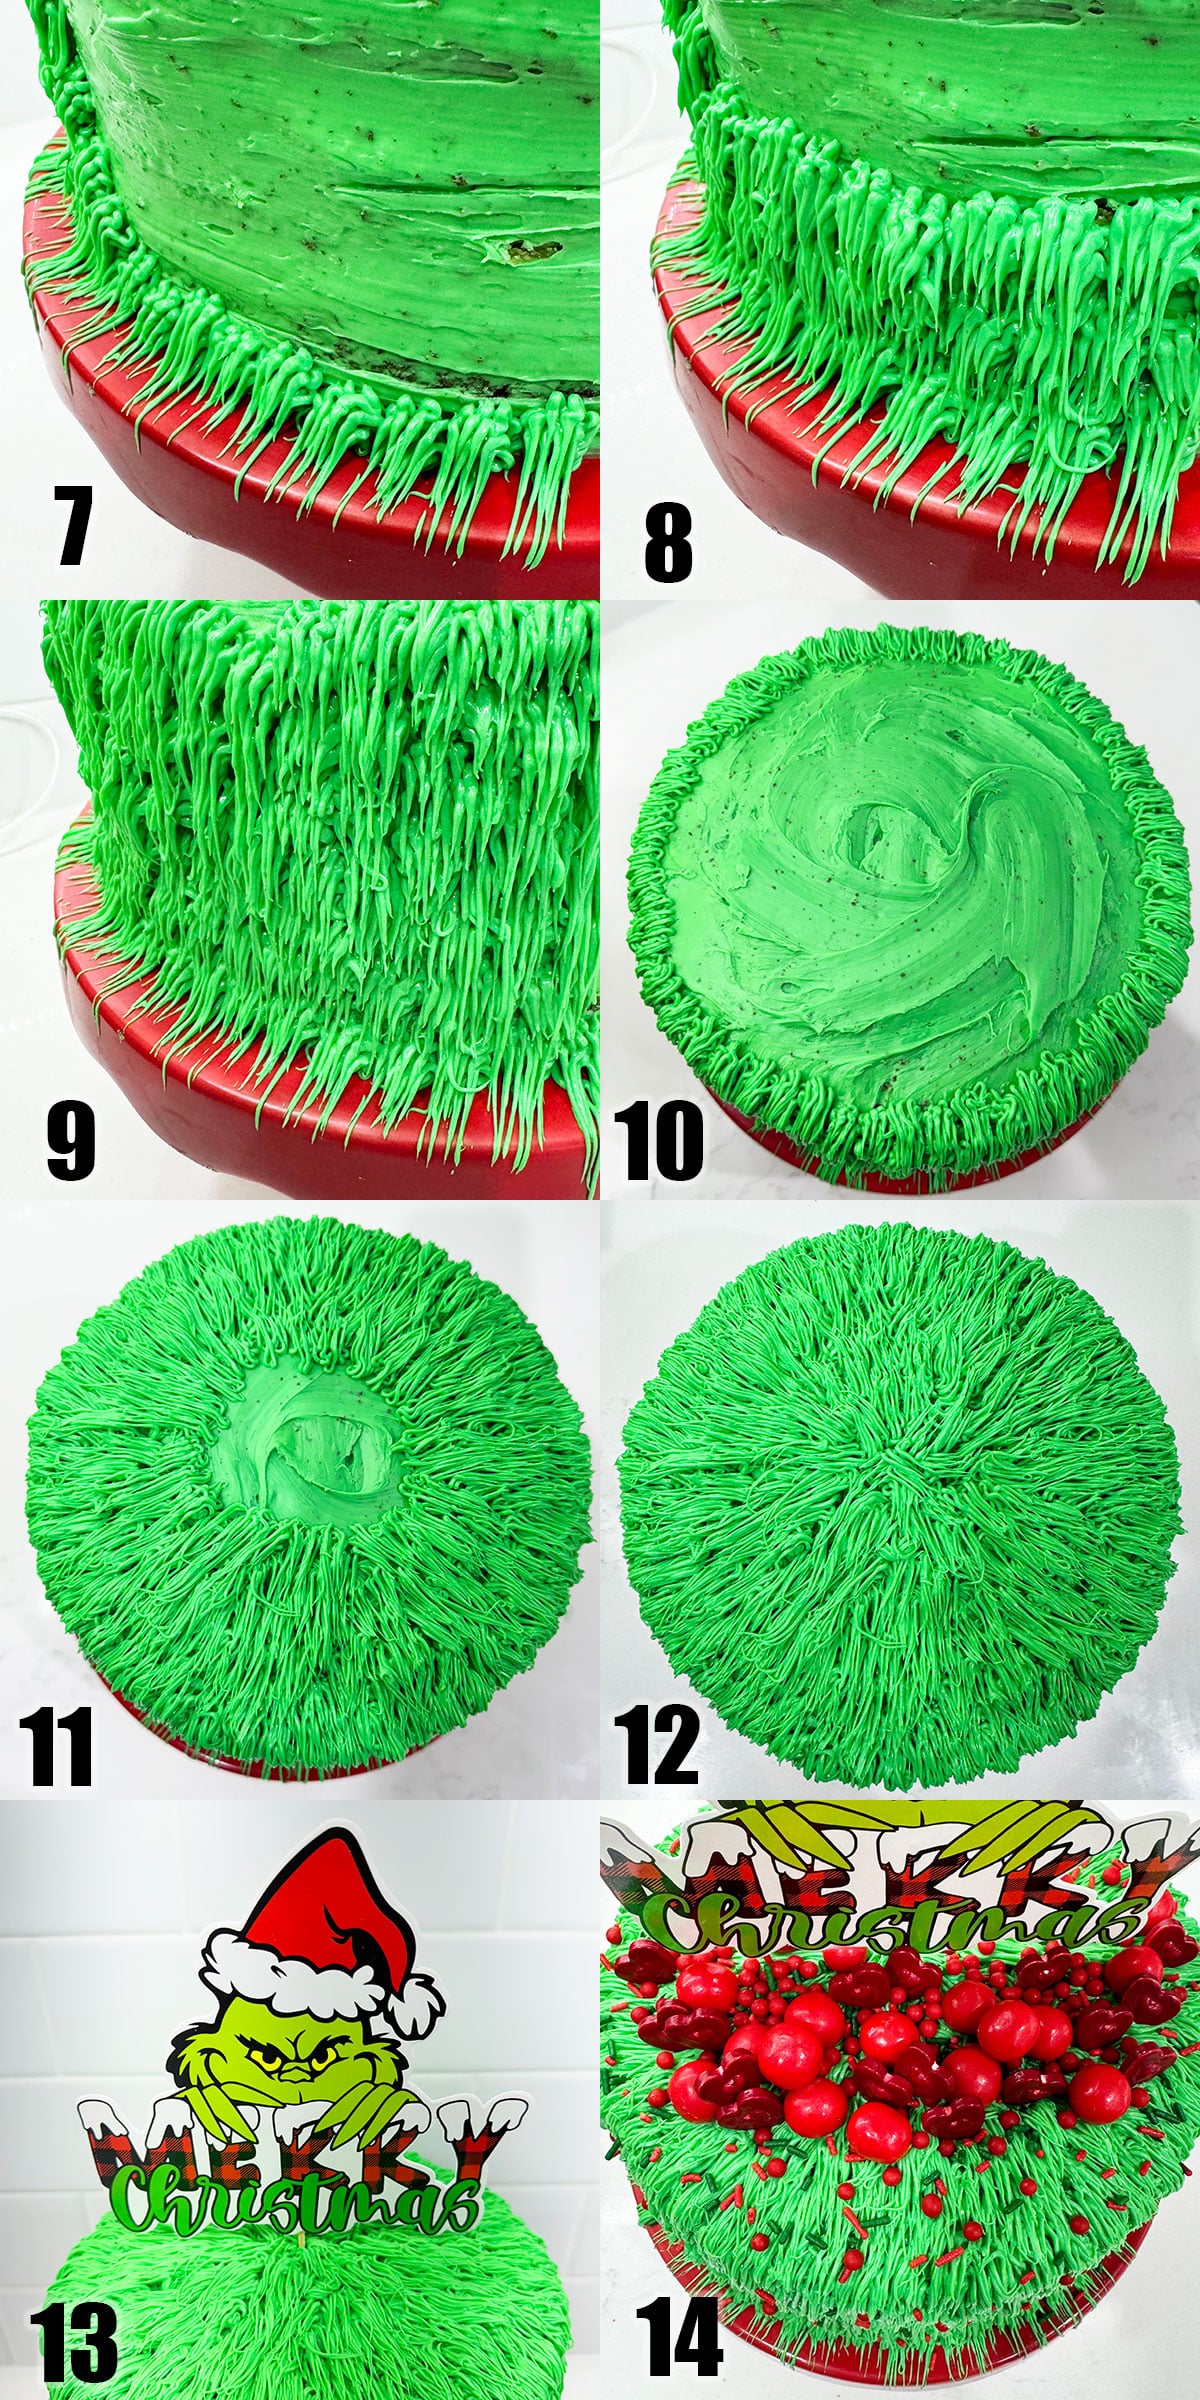 Collage Image With Step by Step Process Shots of How to Decorate Grinch Cake With Green Buttercream Icing. 